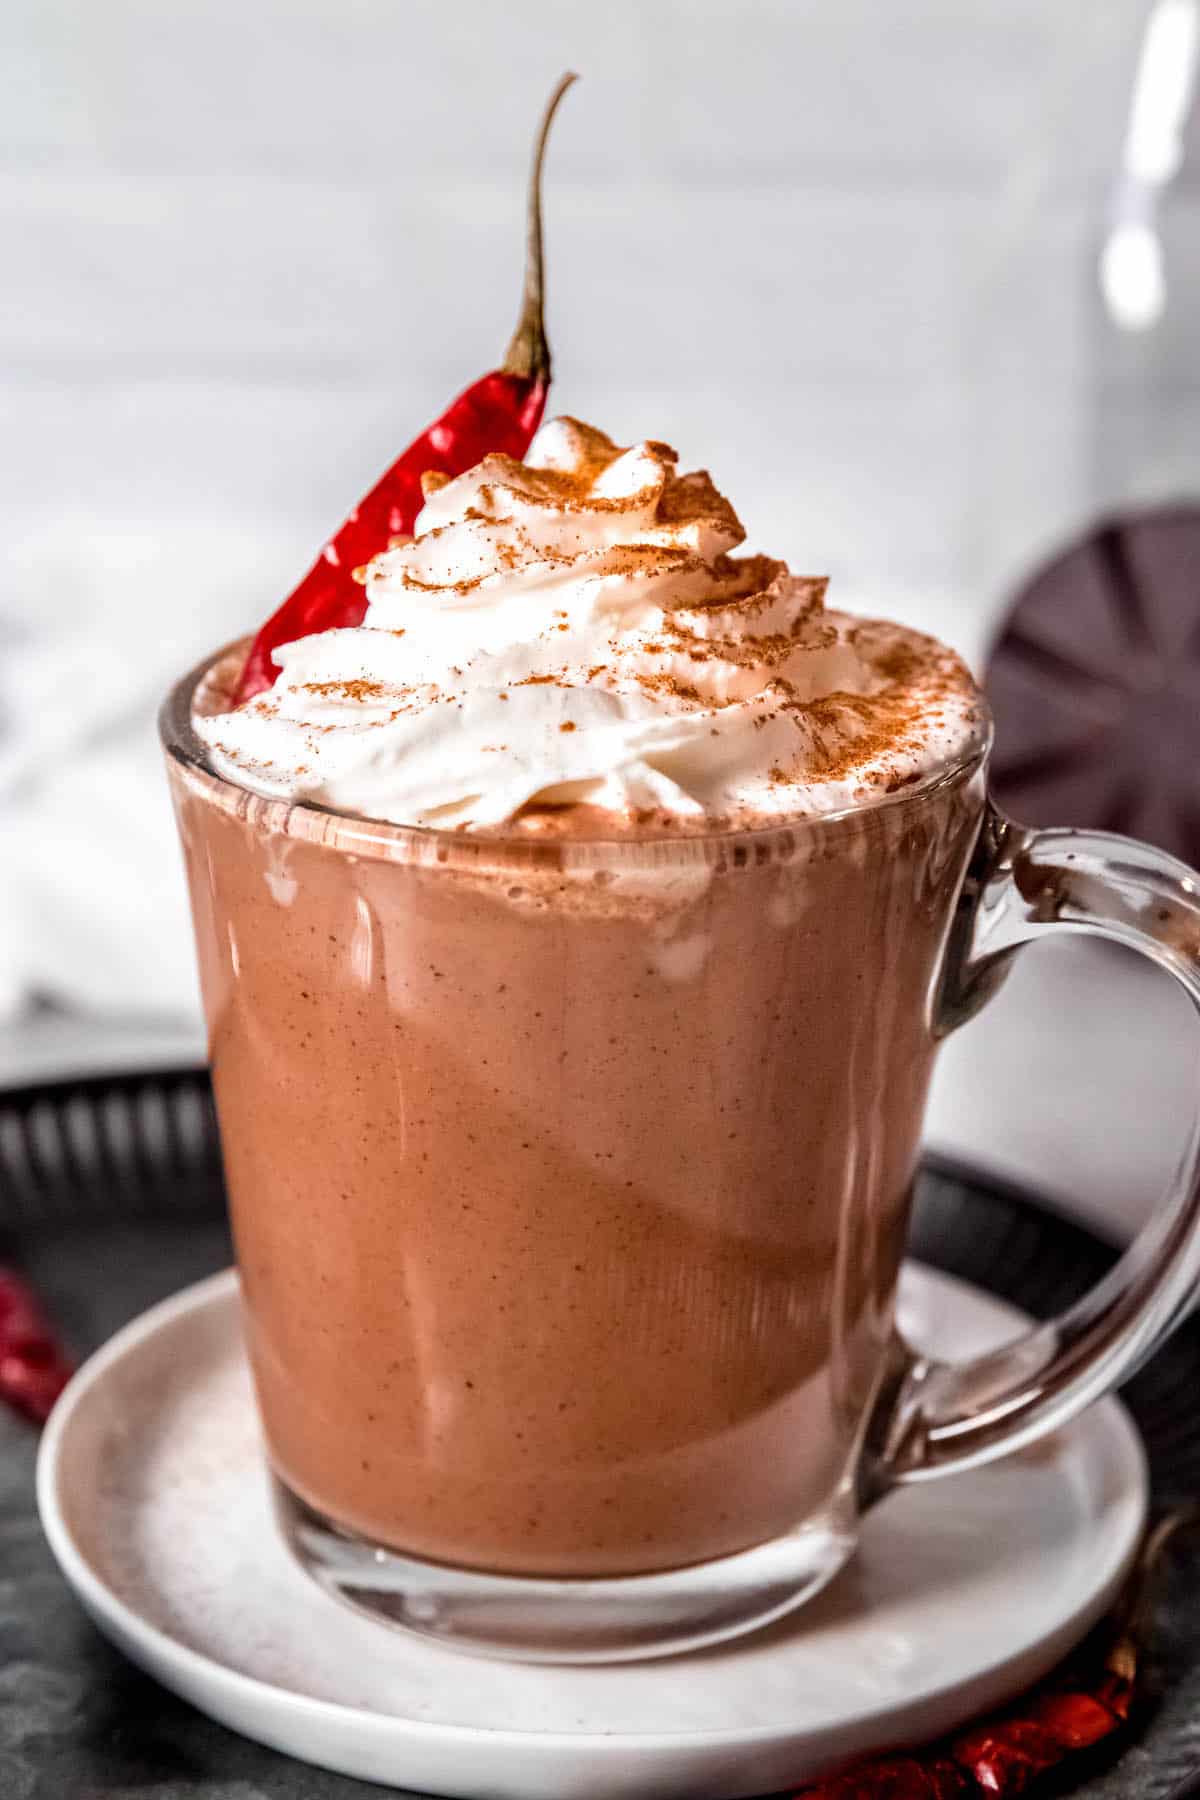 spicy Mexican mocha garnished with whipped cream and a dried chile.